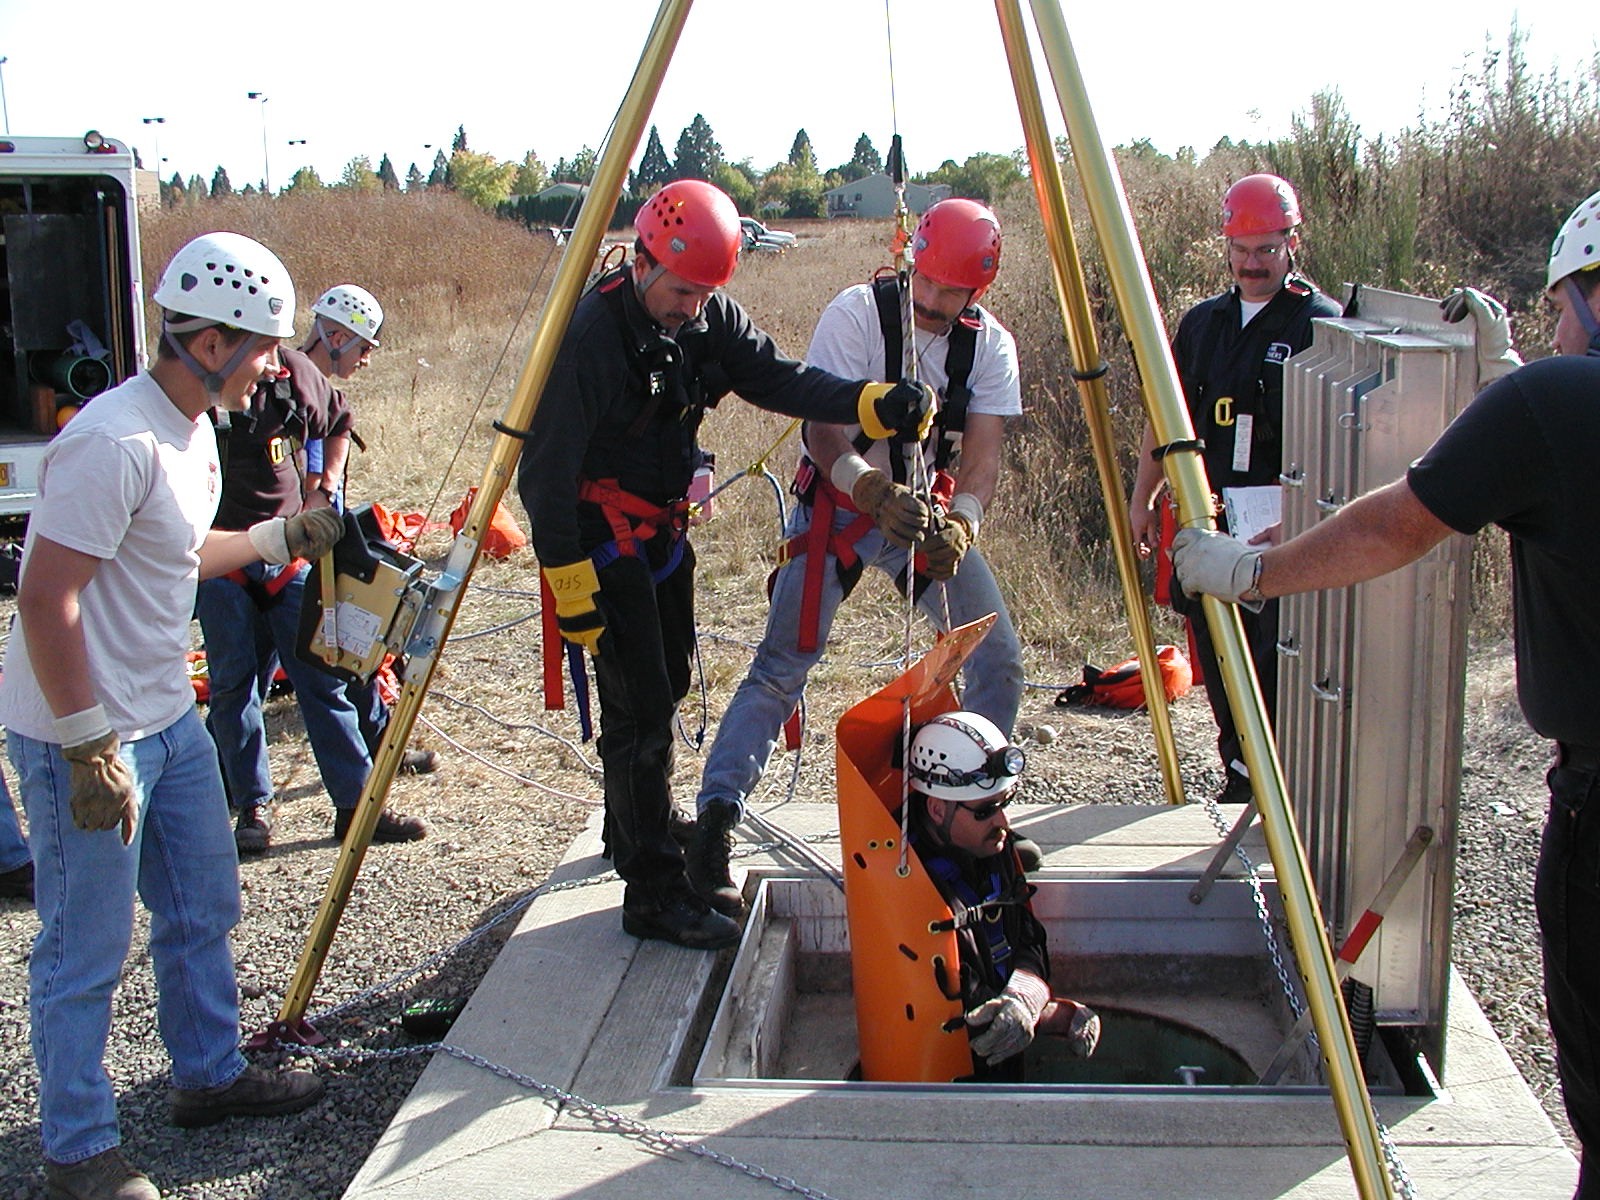 Industrial rescue team pulls the victim from a confined space.